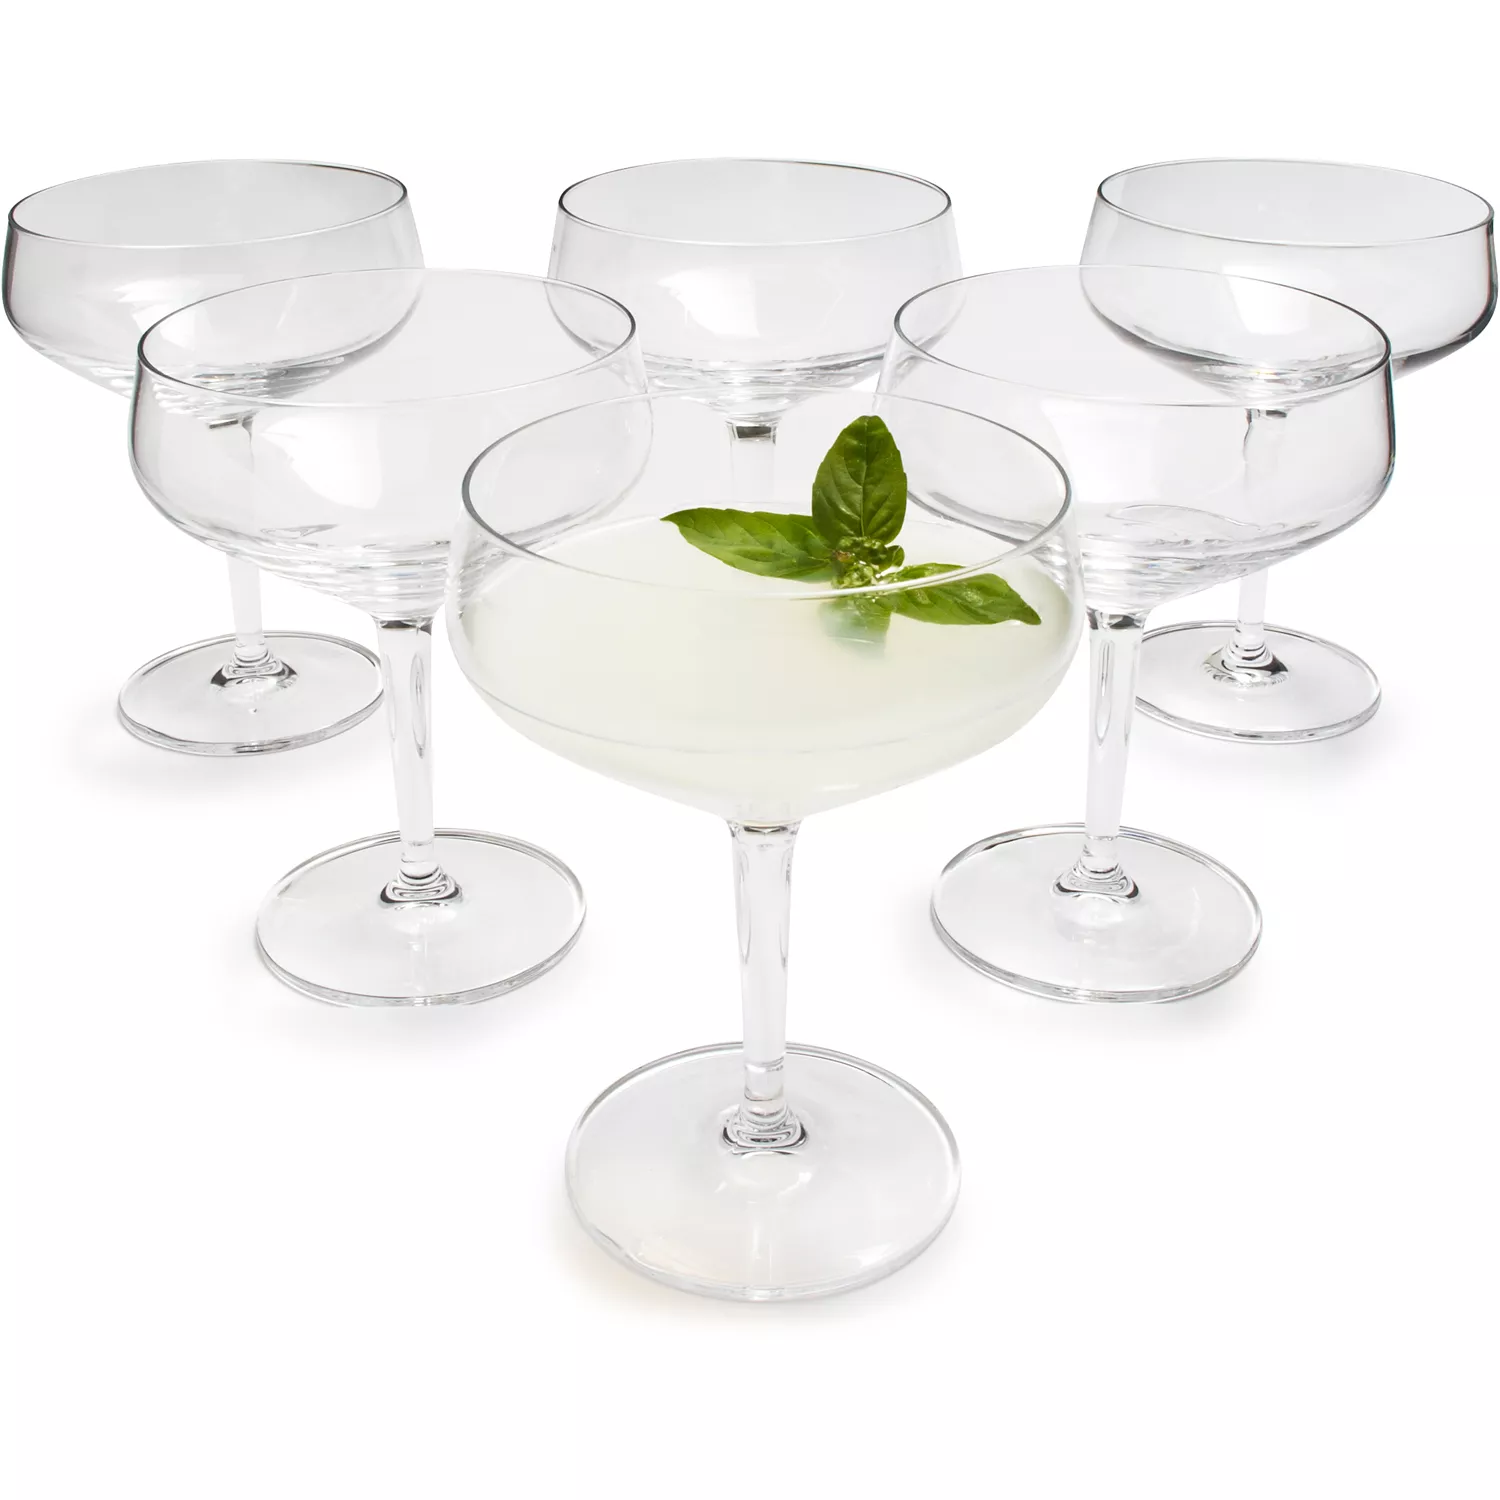 Schott Zwiesel - For You Champagne glass (set of 4)